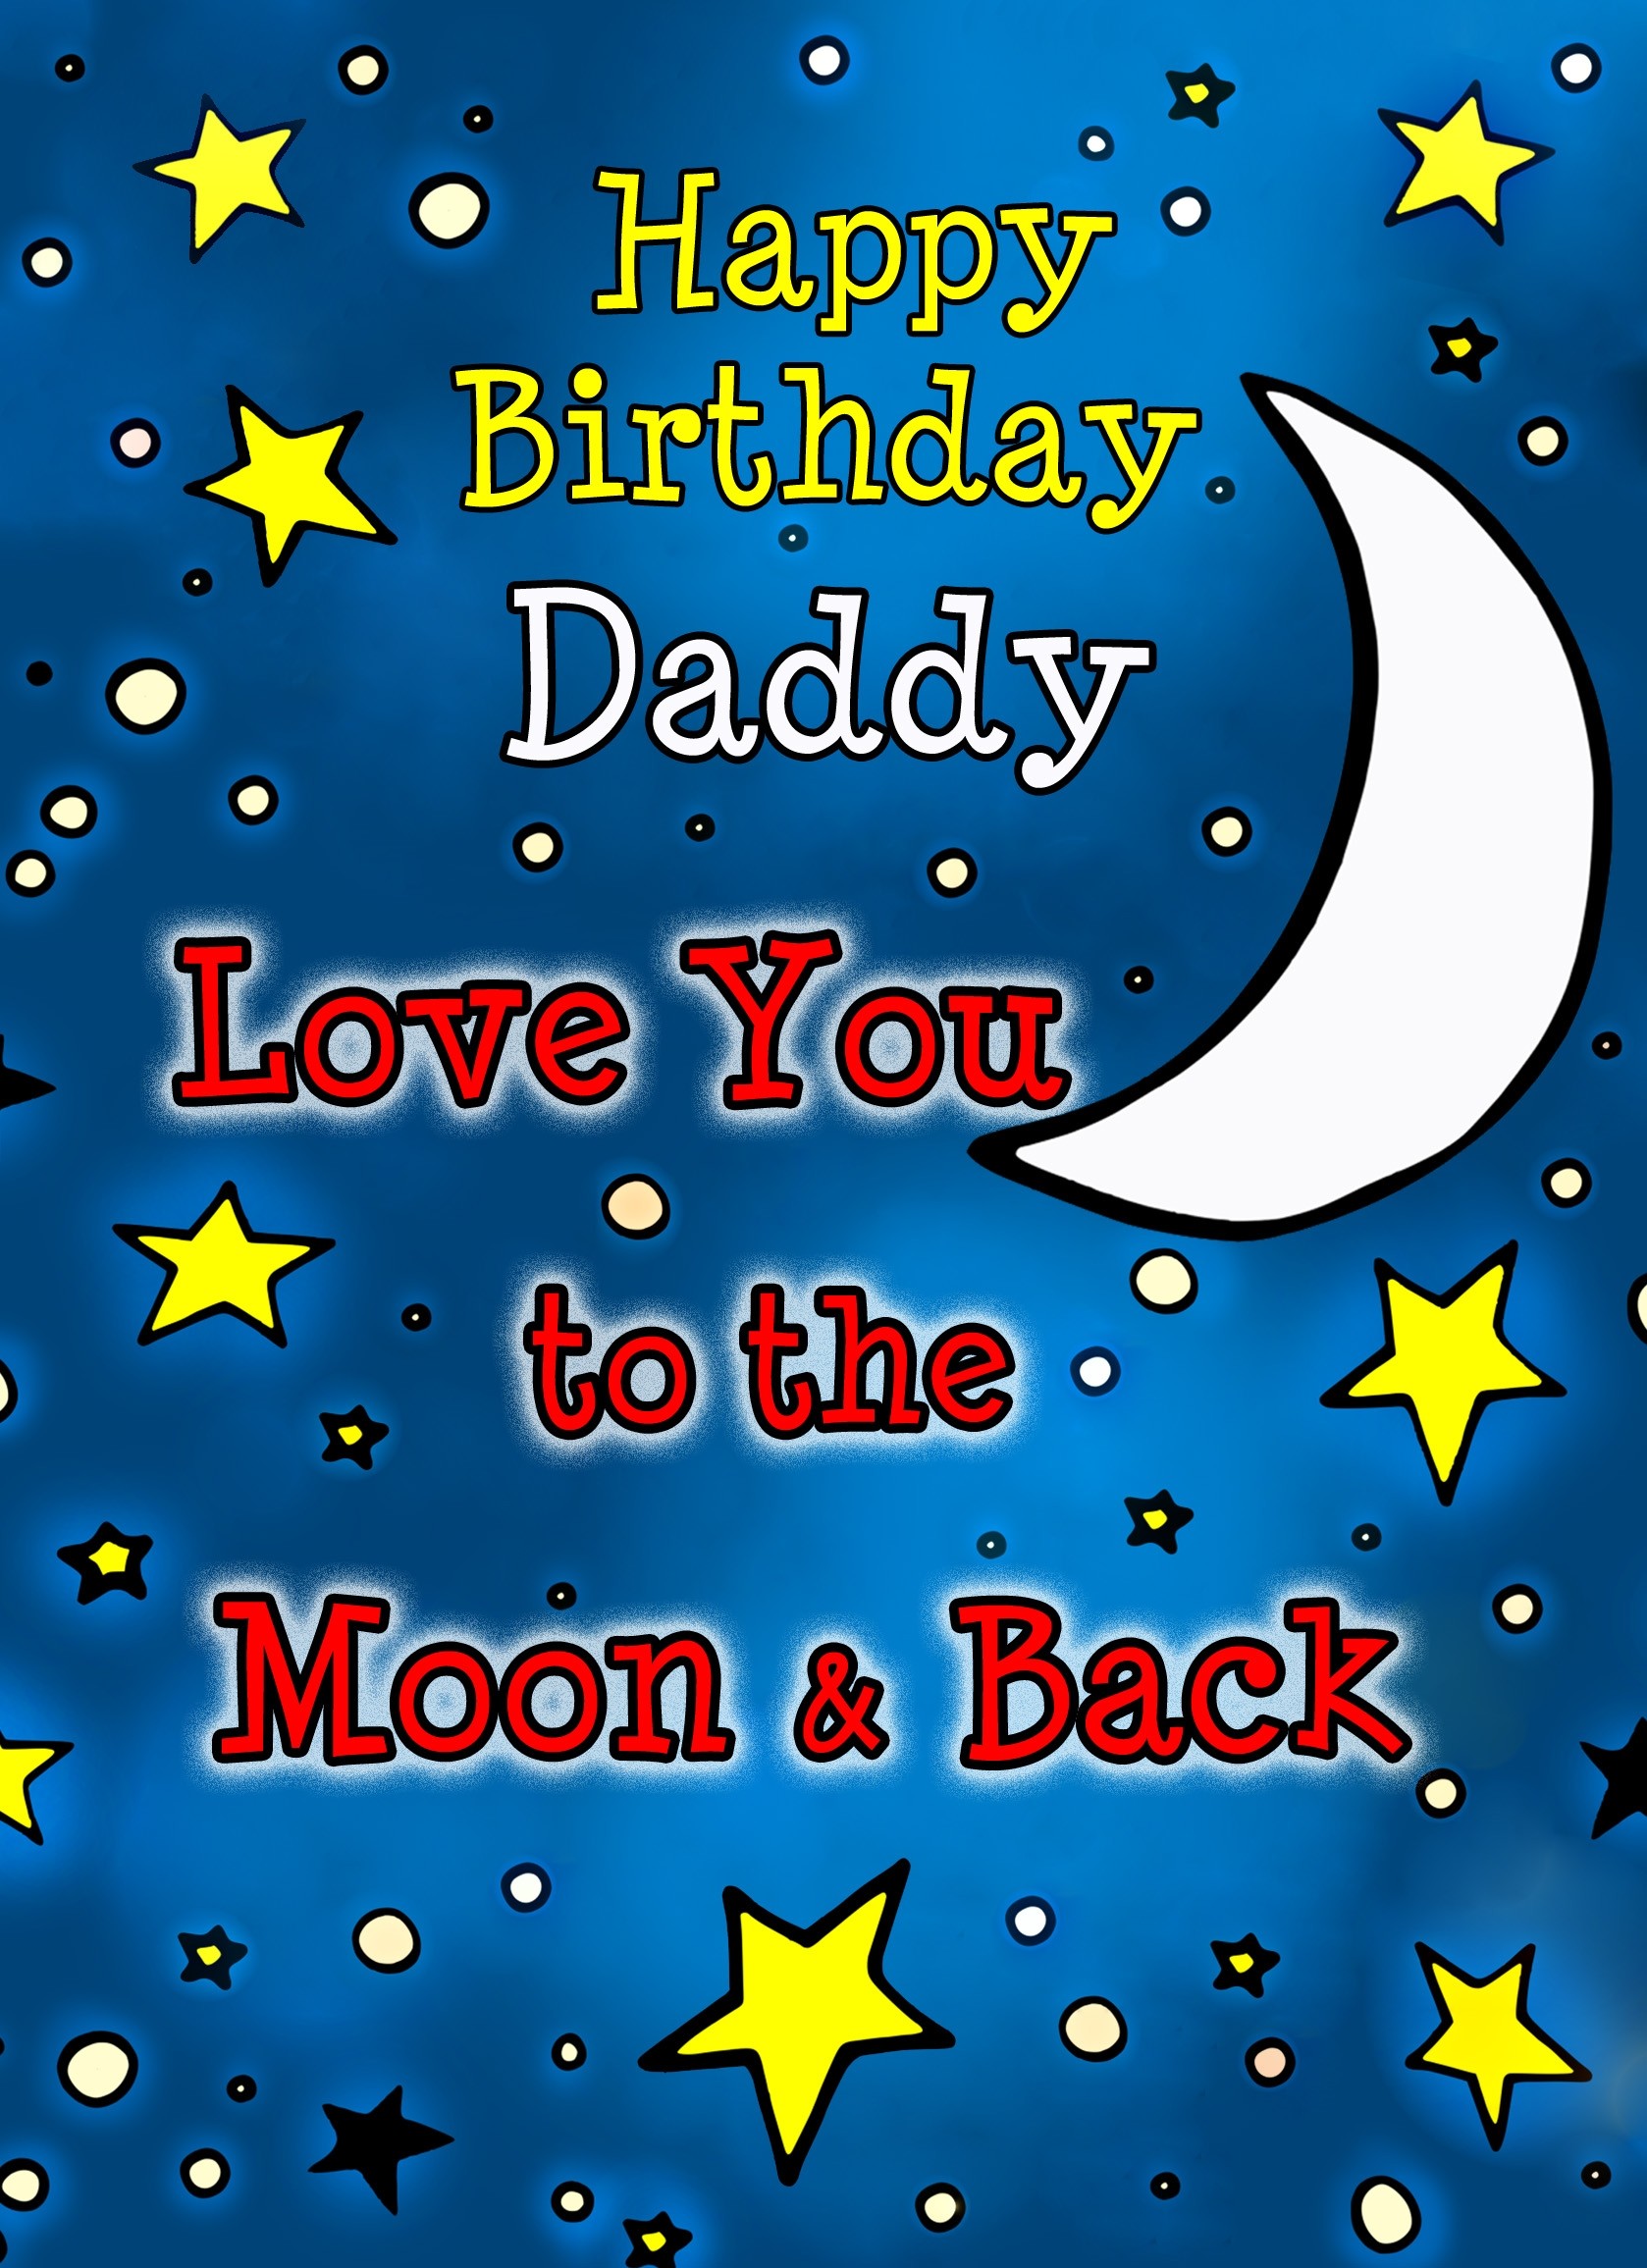 Birthday Card for Daddy (Moon and Back) 